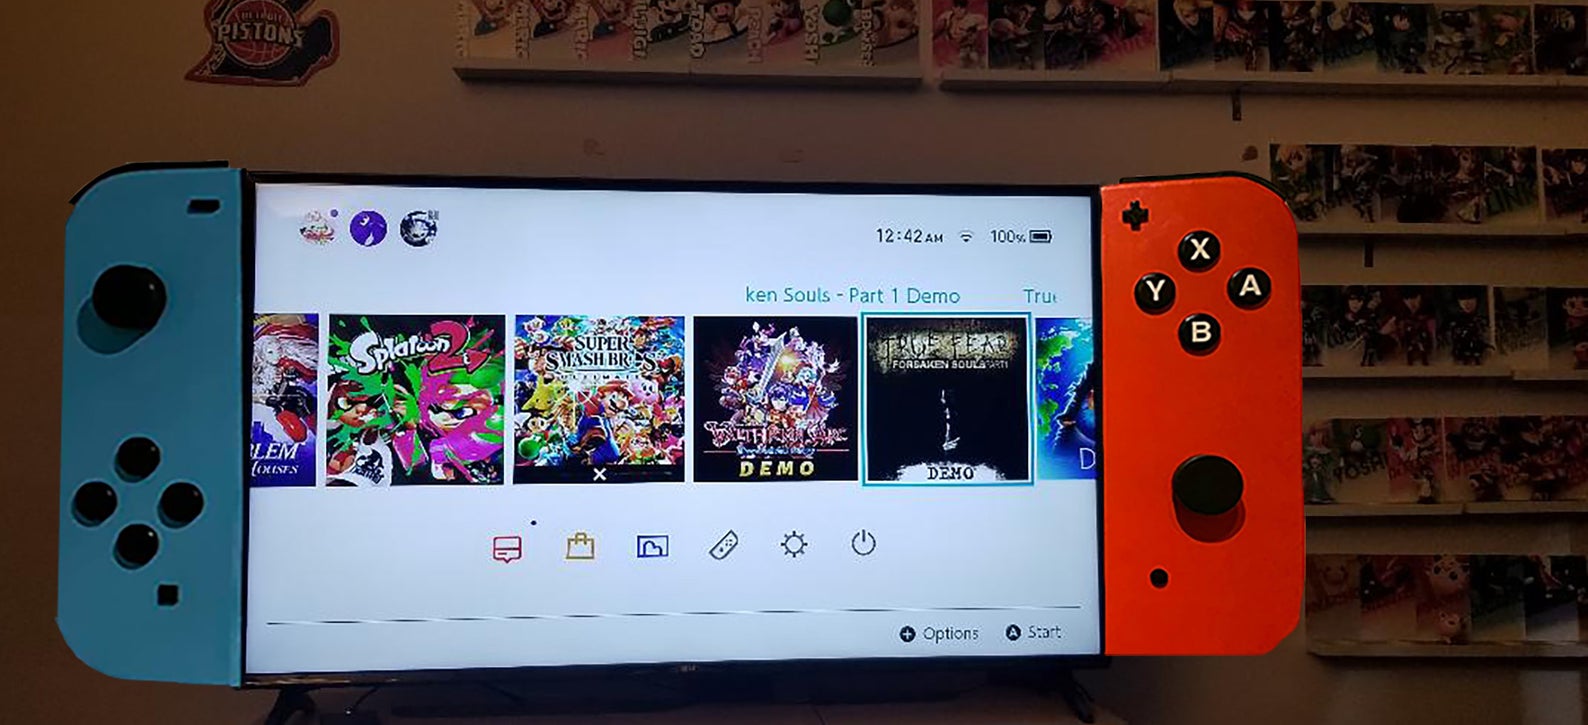 Shelving Unit Makes Your TV Look Like A Nintendo Switch :: WRAL.com